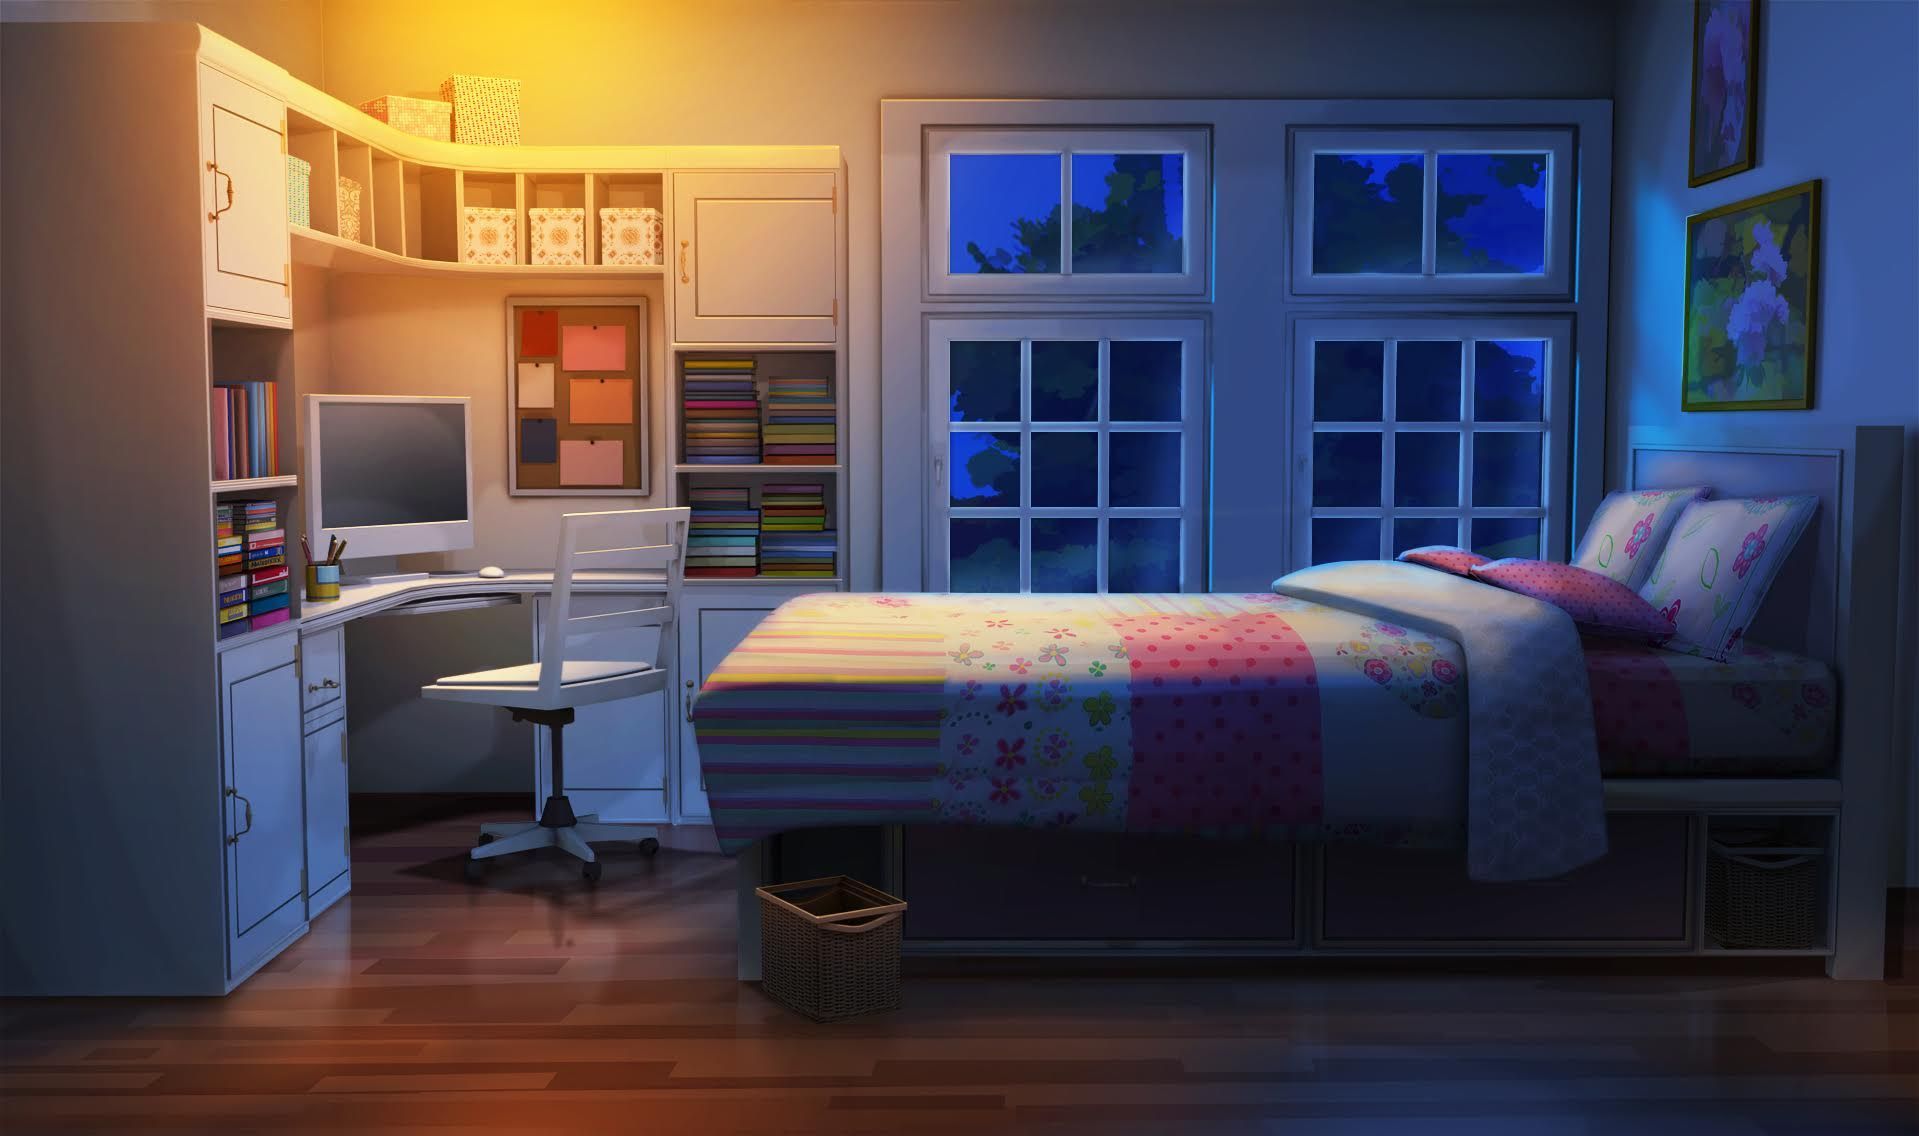 prompthunt anime digital drawing of a comfy bedroom